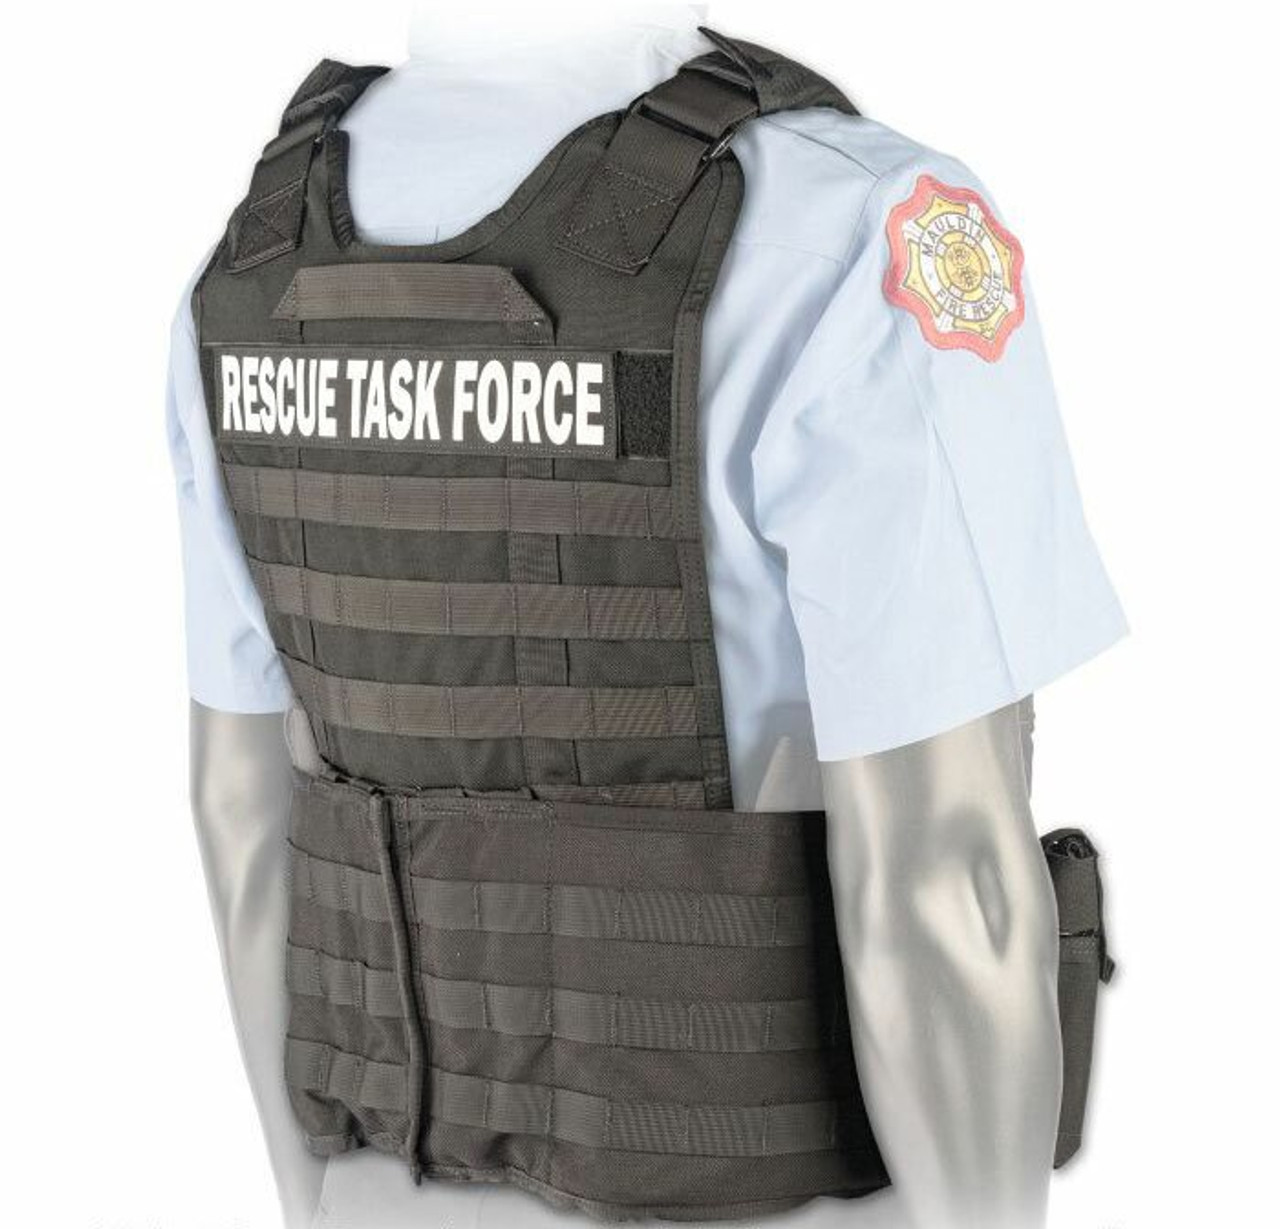 Rescue Task Force Tactical Vest Kit with Level III Soft Body Armor, Si